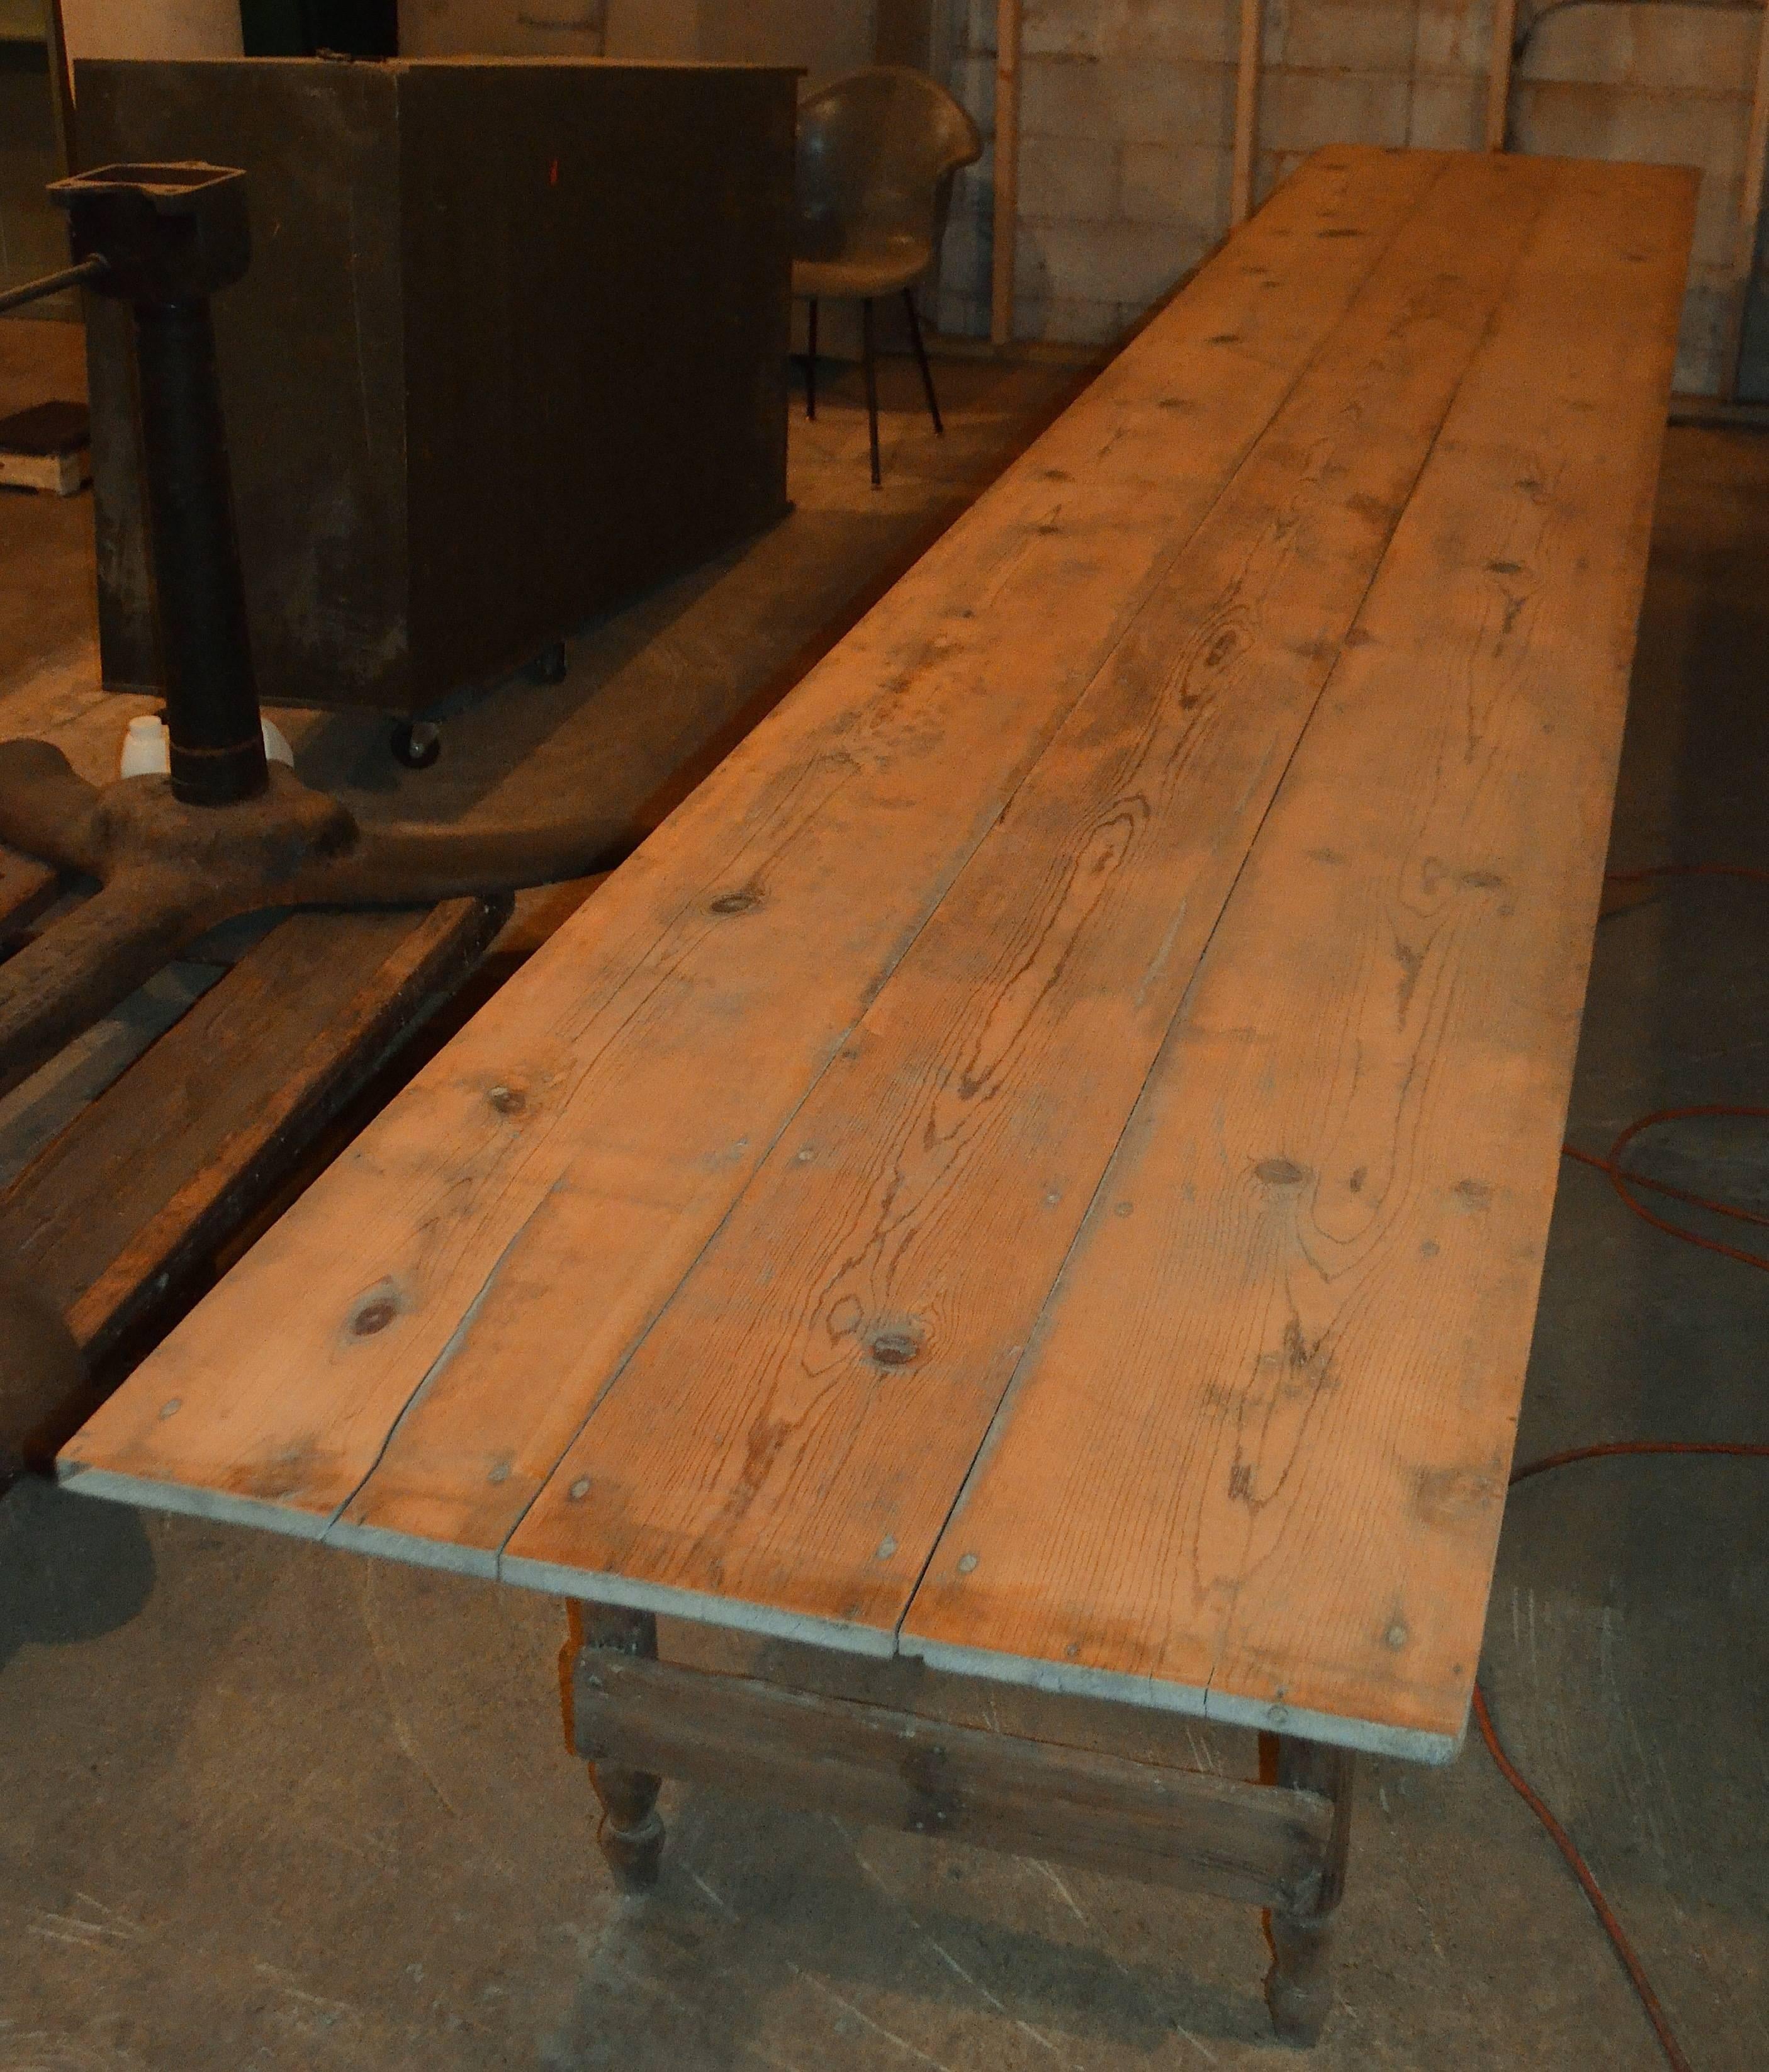 Speaking of summer parties and reunions, this harvest table that can easily accommodate 20-25 guests. More than sixteen feet in length, amazingly rock solid, no sway, no way. The legs are lathe-turned and the grain of the pine board is gorgeous. 16